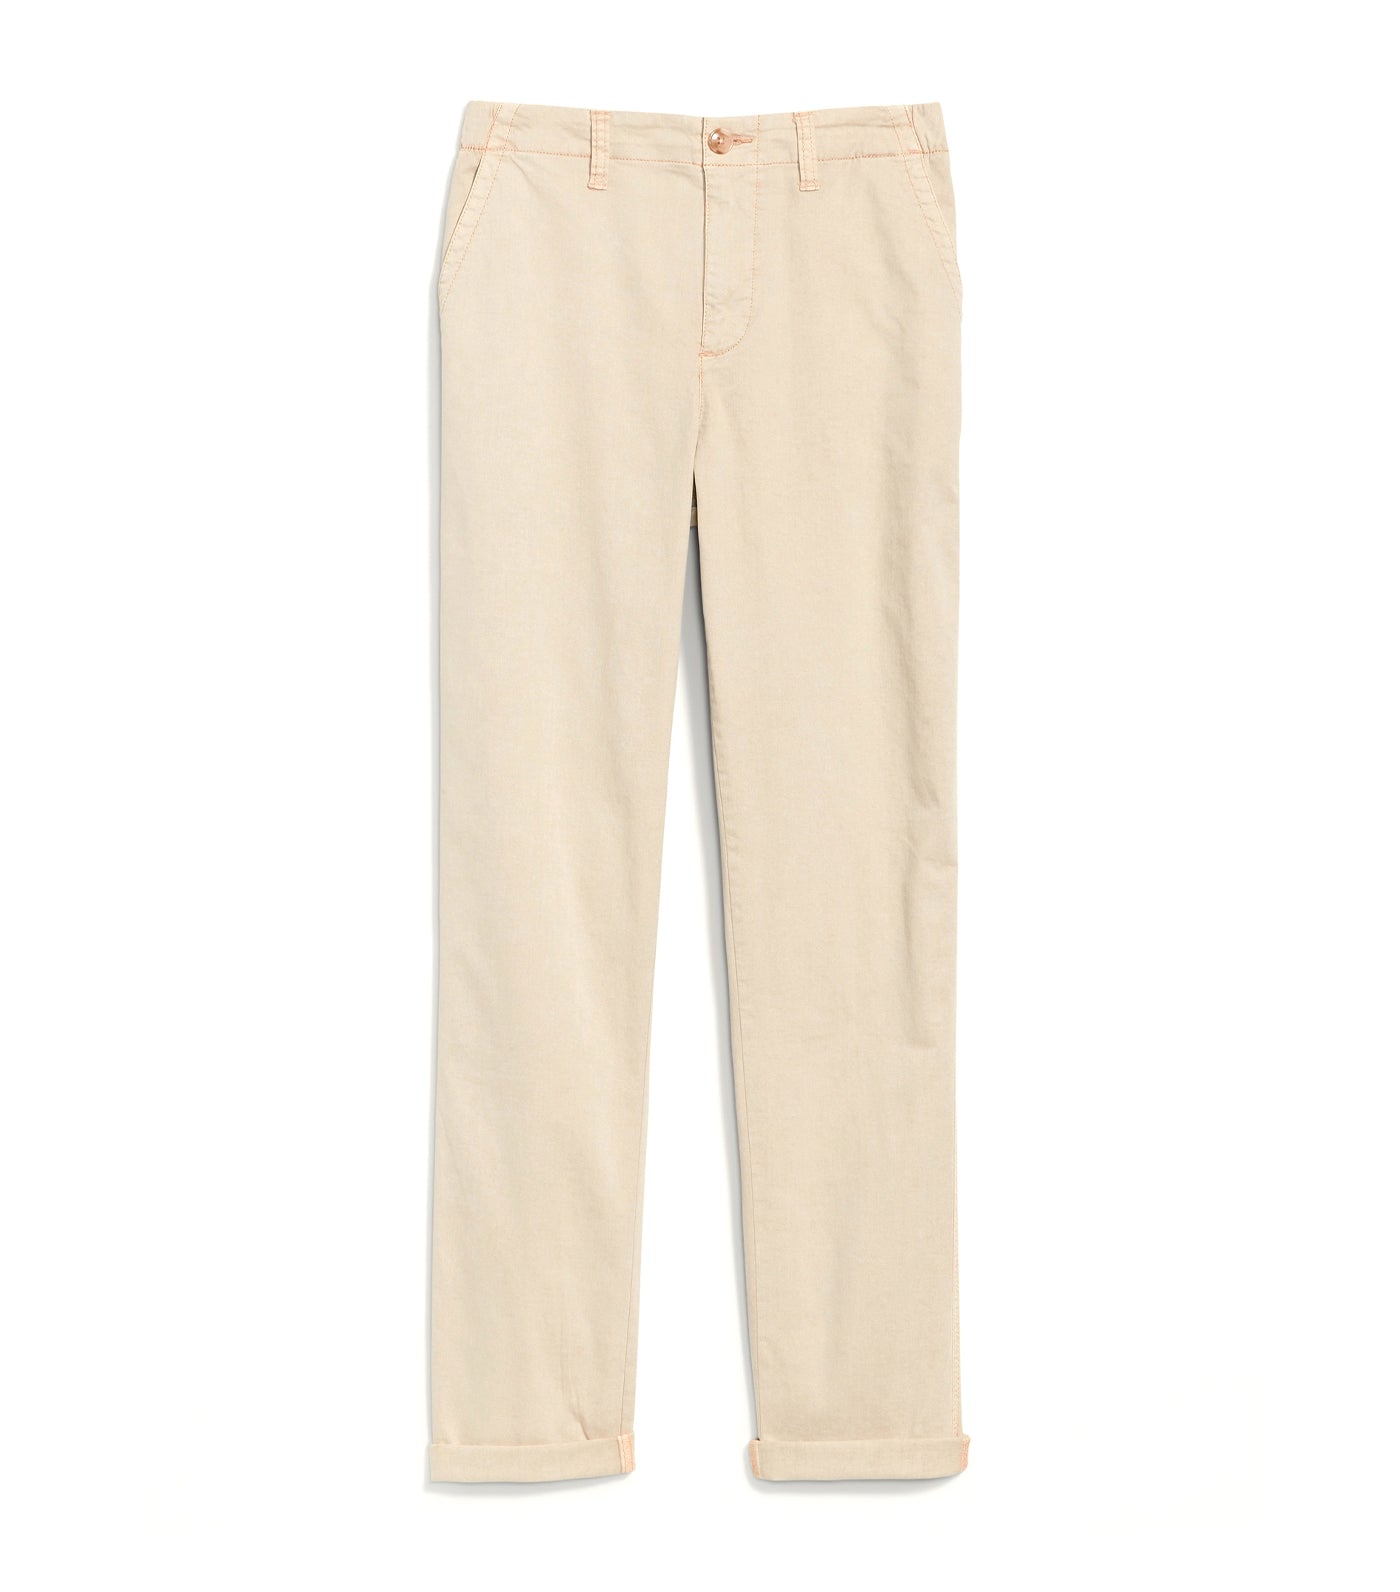 Old Navy High-Waisted OGC Chino Pants for Women